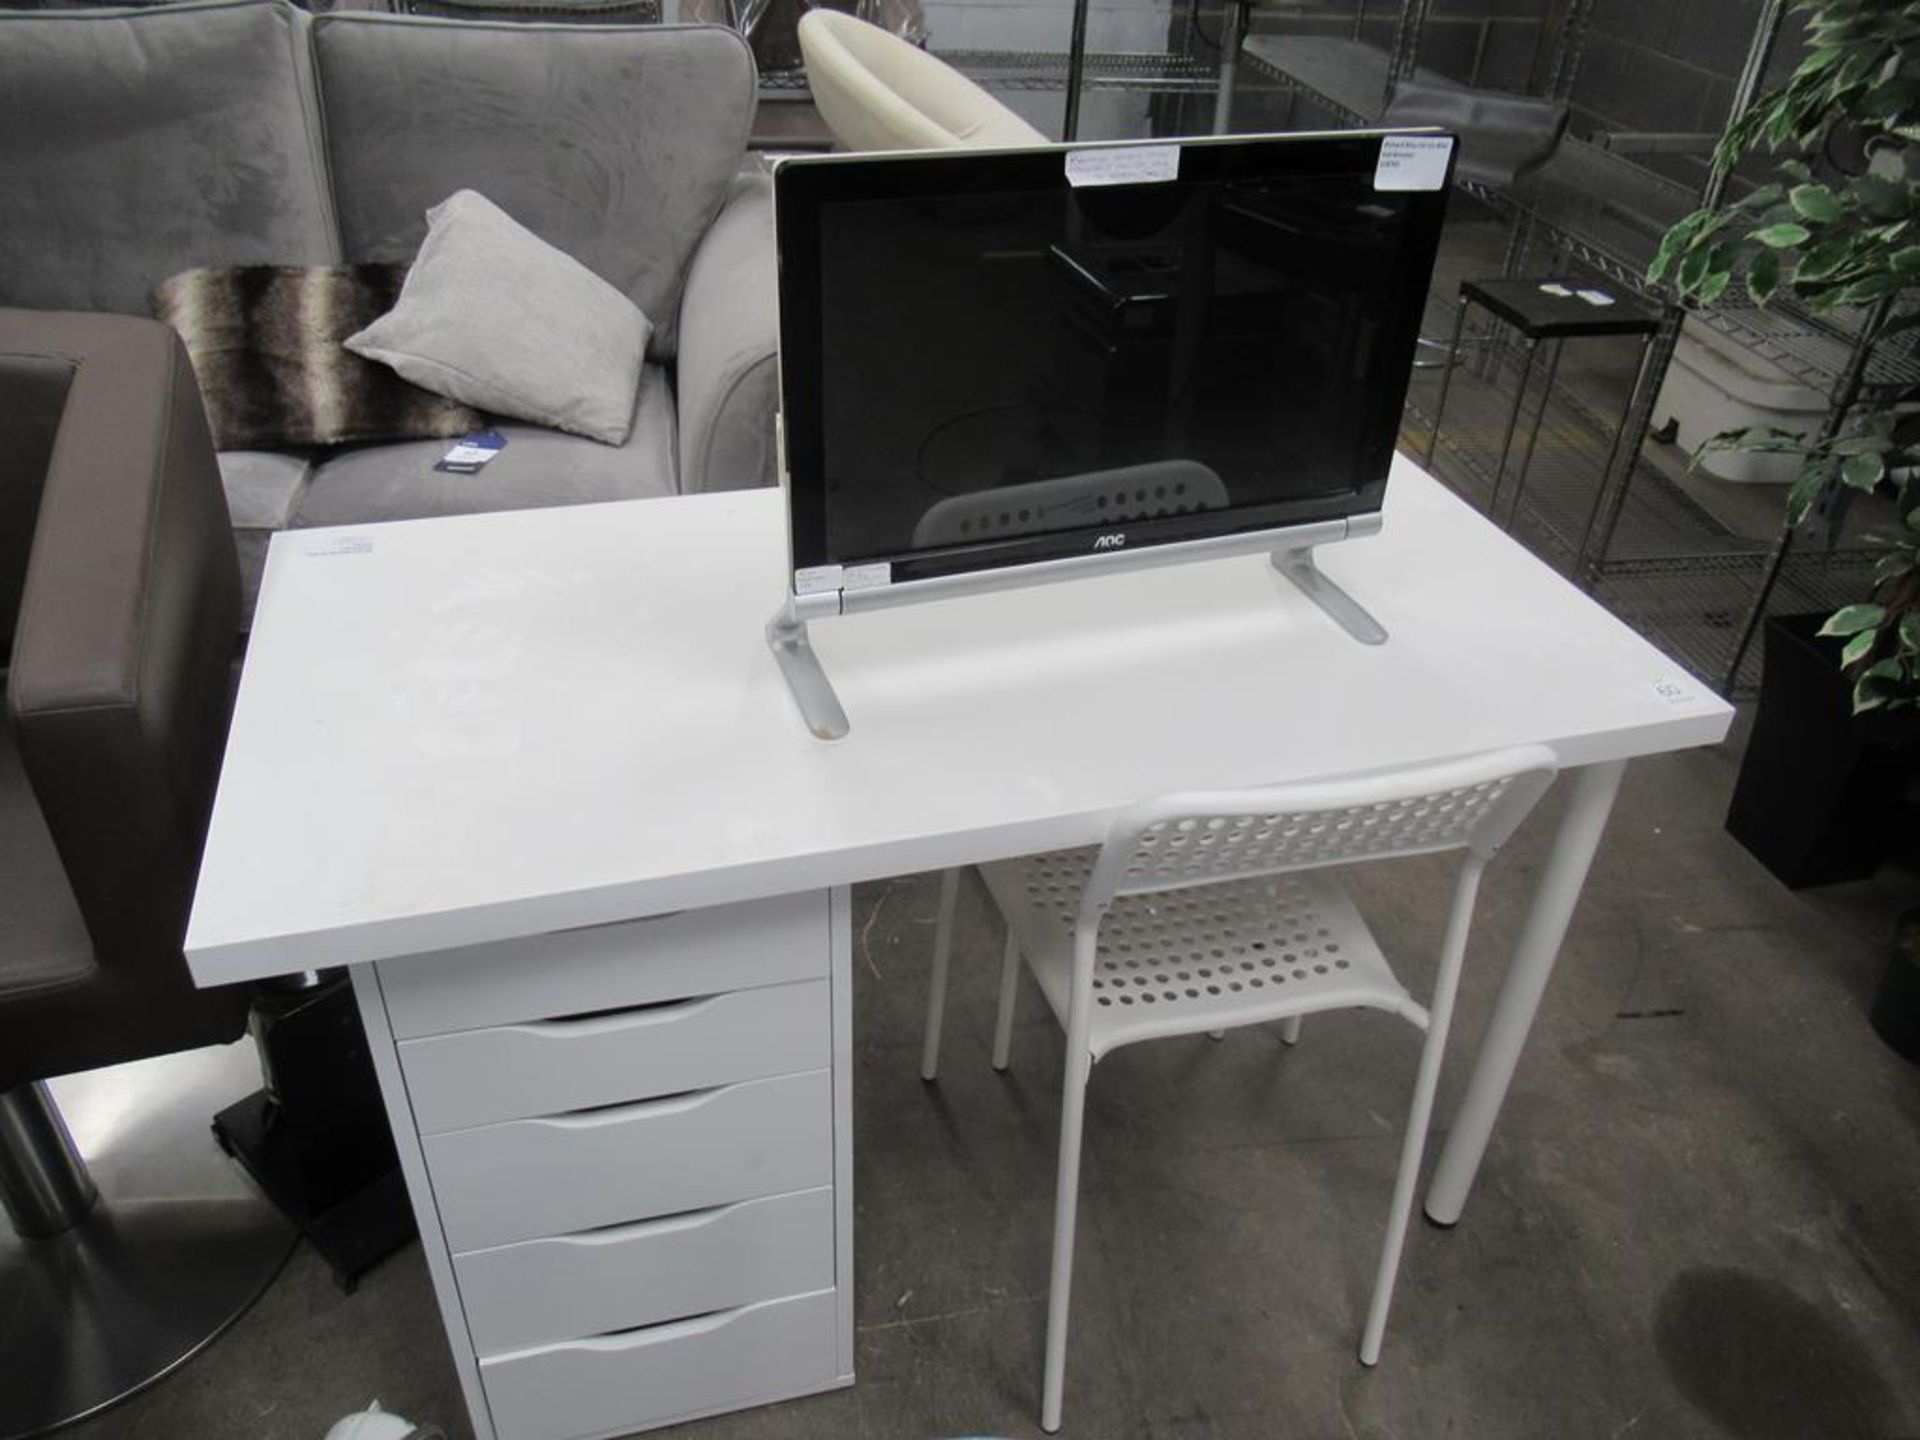 A white desk with 2 x chairs and AOC monitor